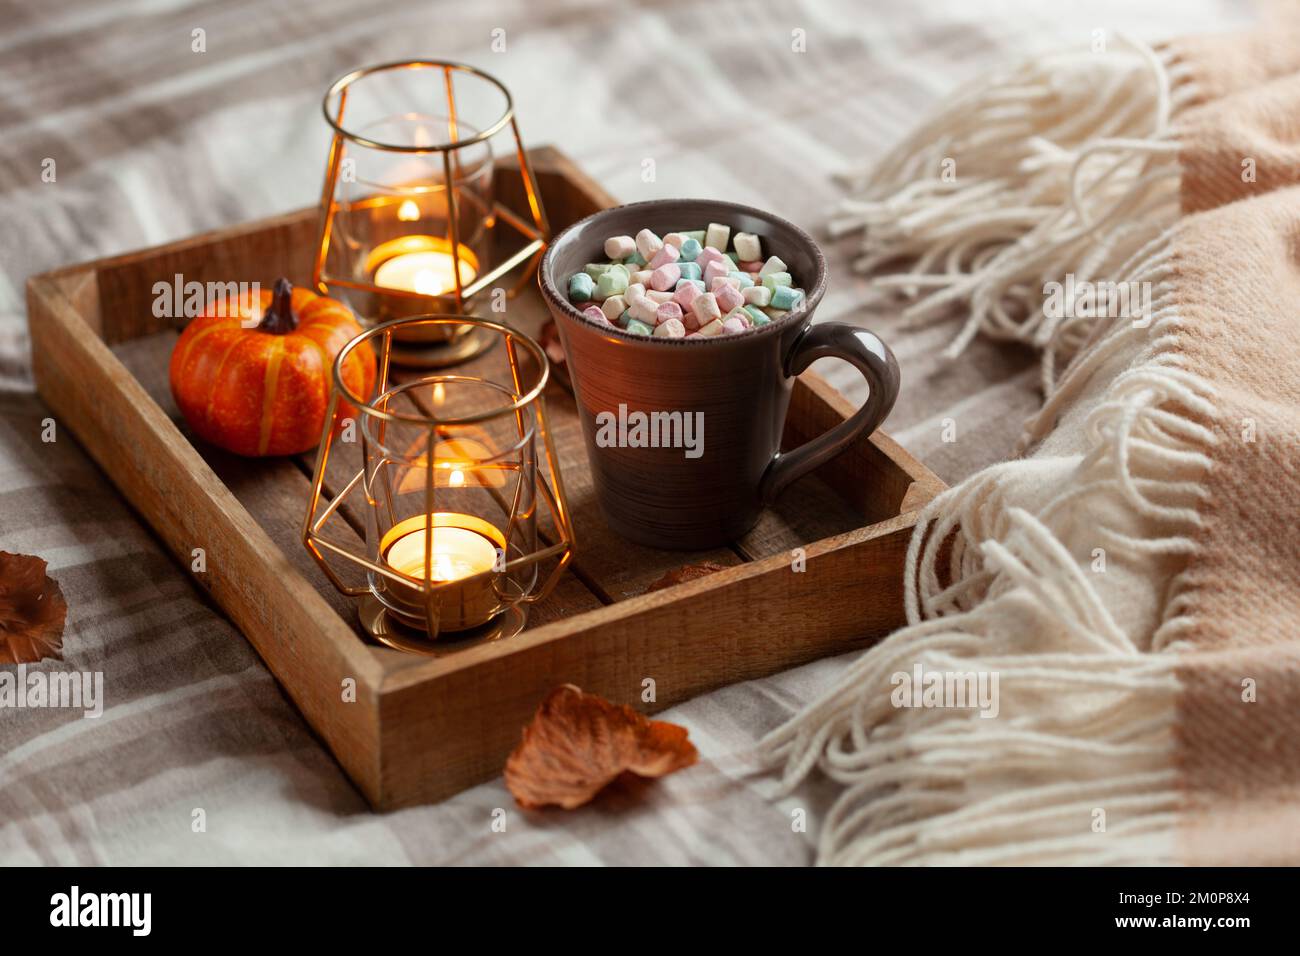 warm cozy bedroom winter or autumn concept, cup of hot chocolate on tray, candles throw Stock Photo